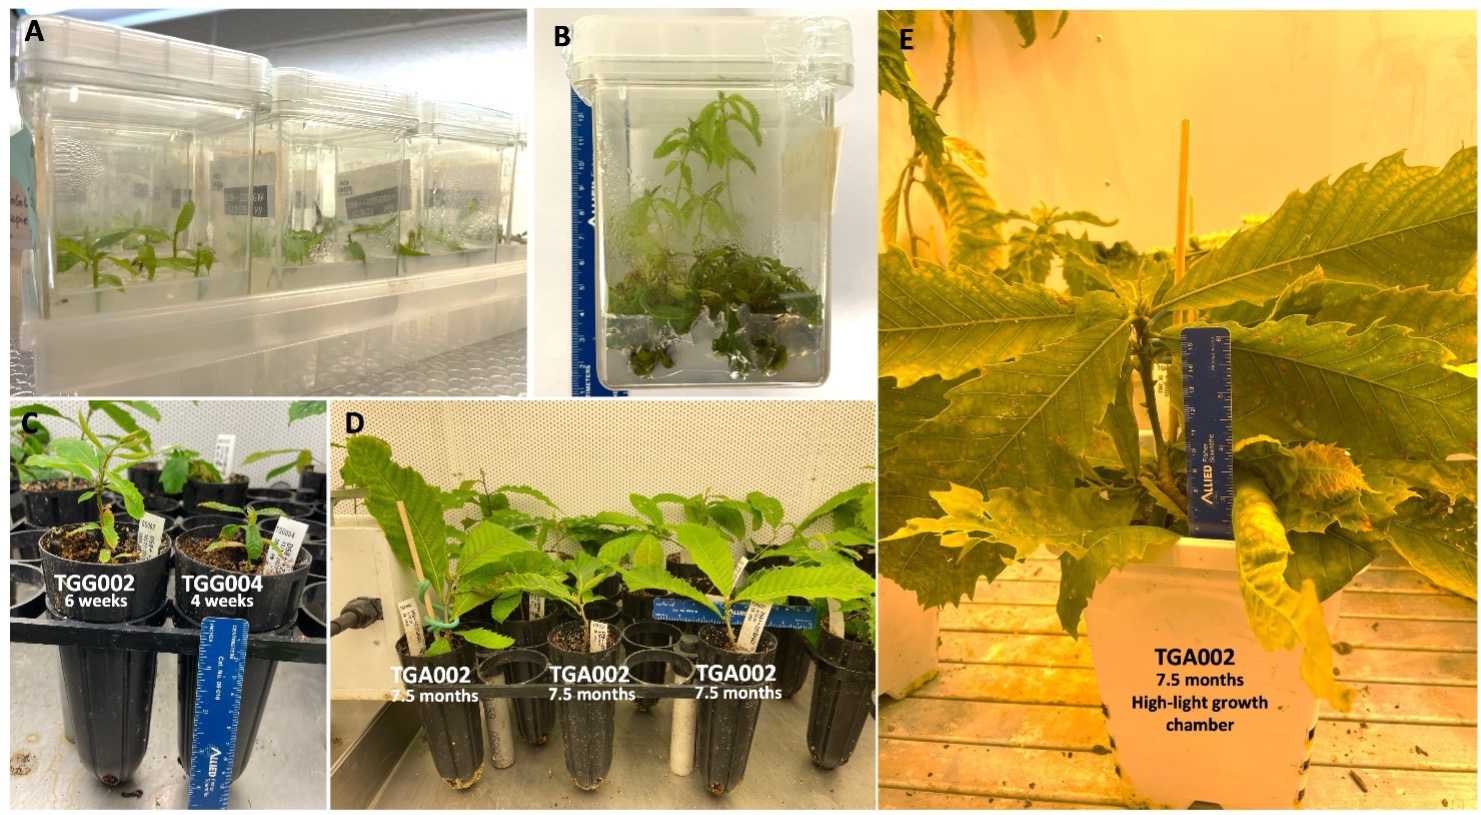 Figure 8: Production of homozygous plants via tissue culture at SUNY ESF. Five photos at different stages of plant development.